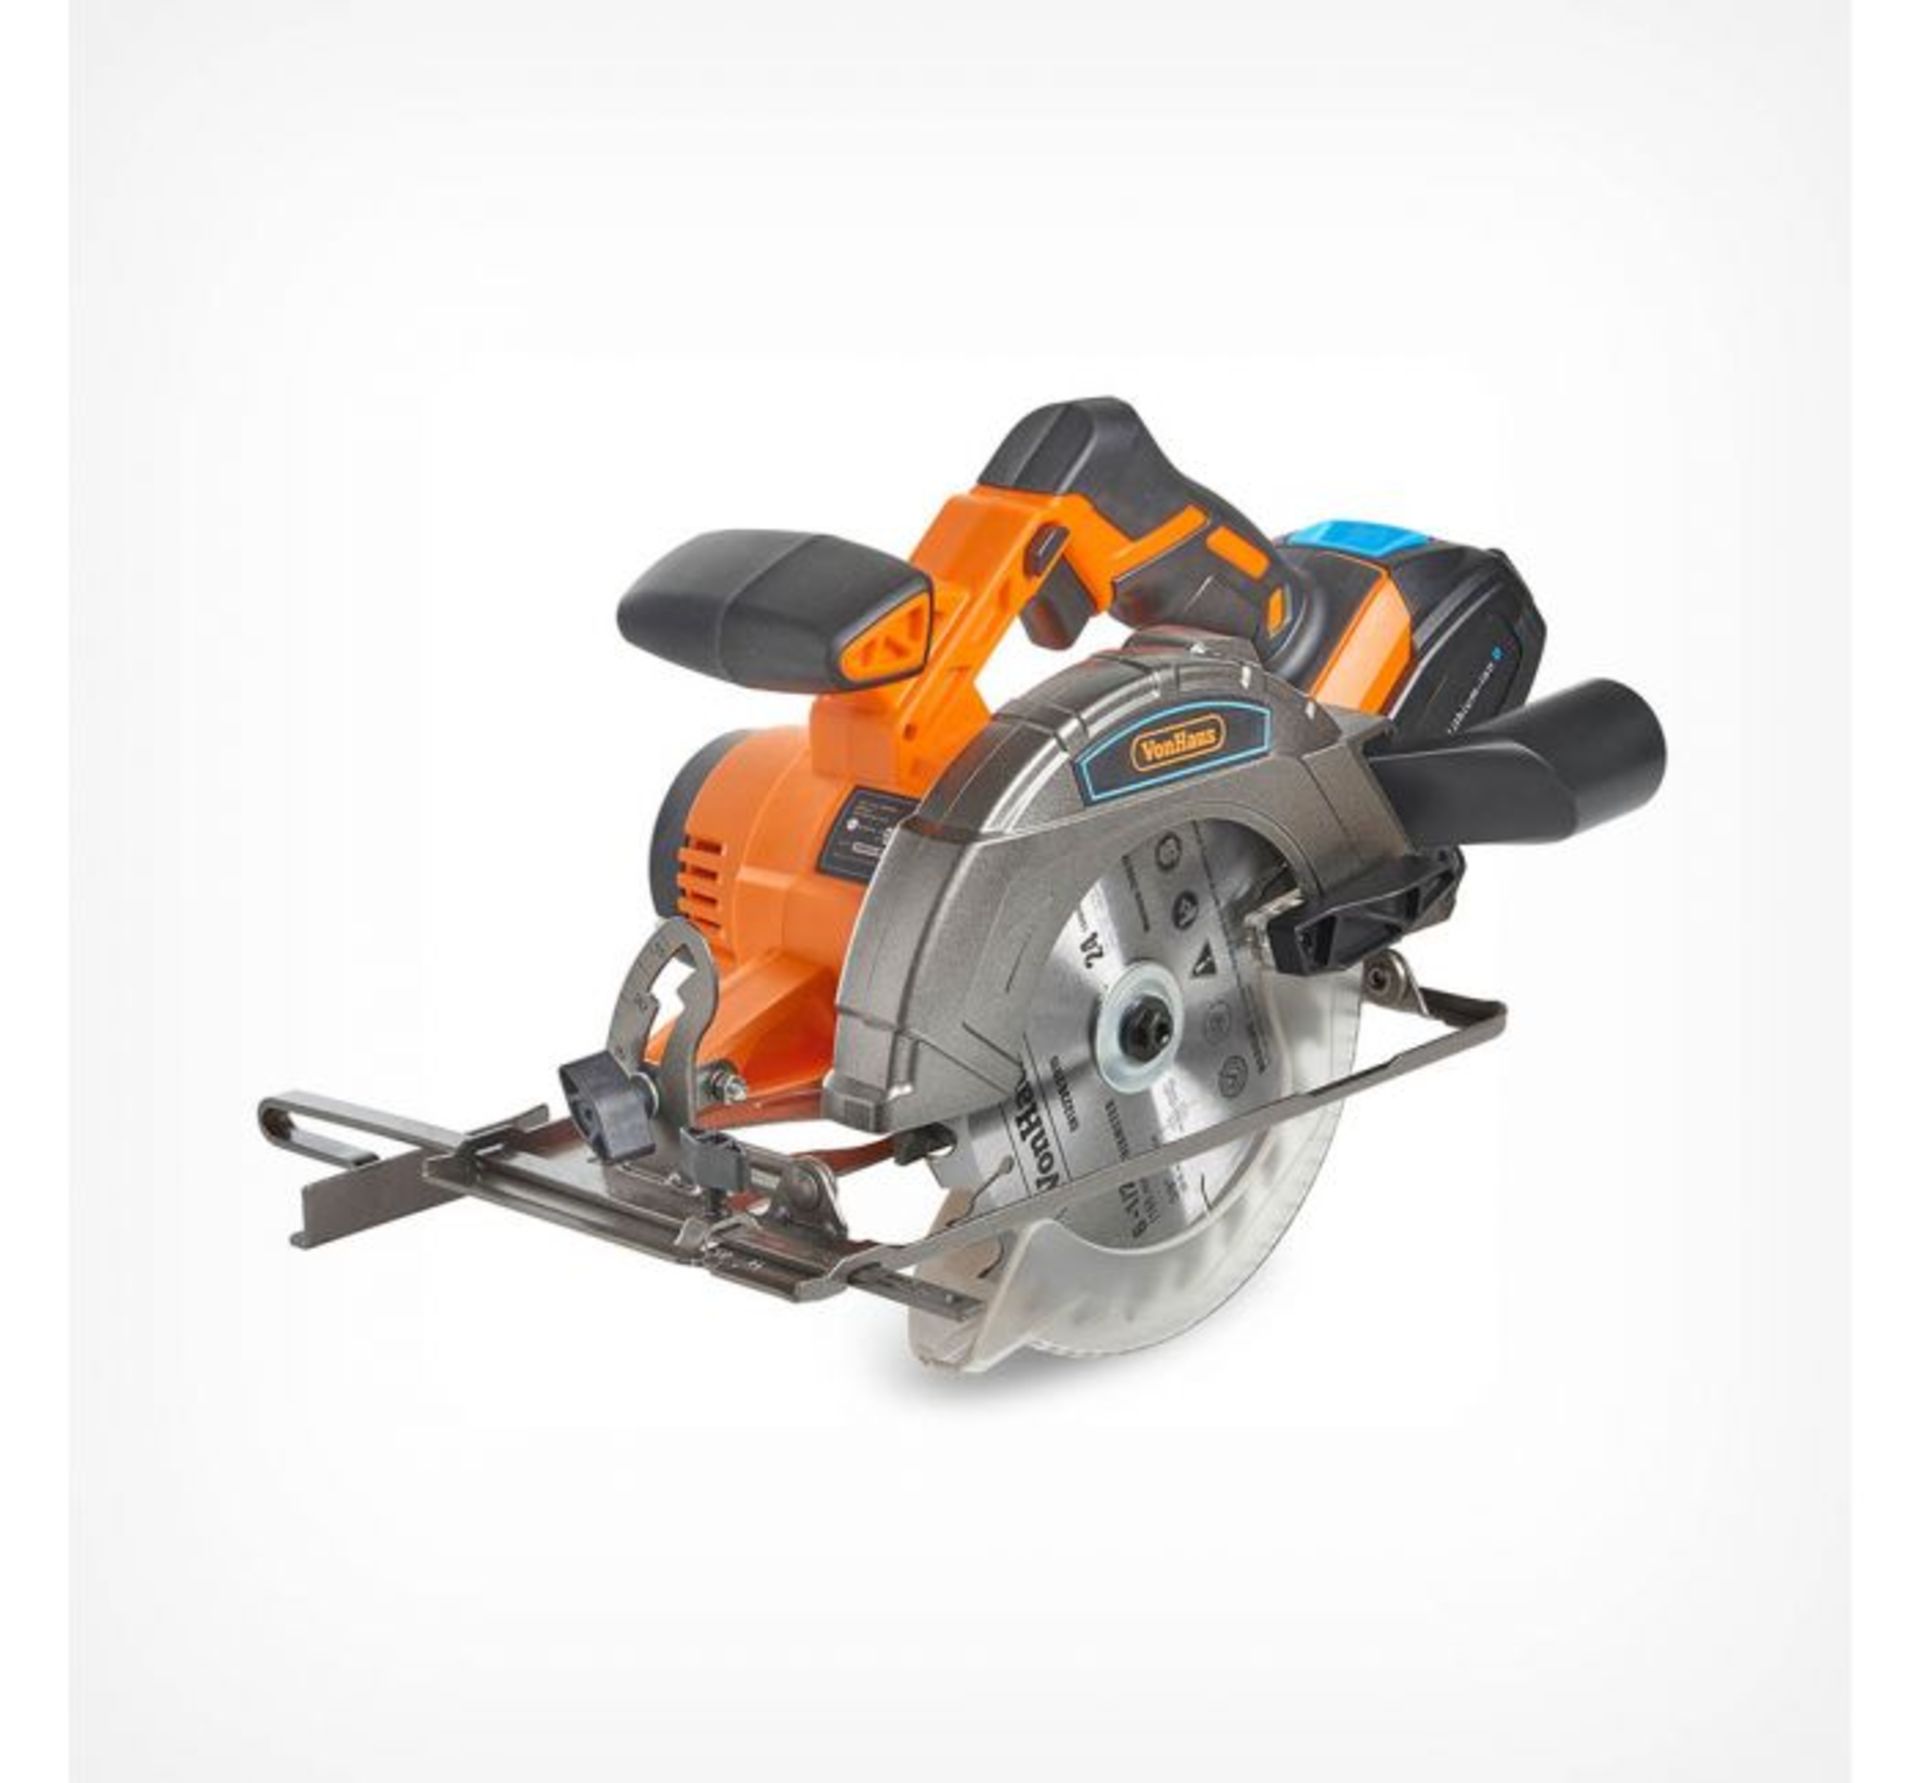 (JH5) 20V Max Circular Saw 20V Max 2Ah battery included is compatible with other tools in the ... - Image 2 of 3